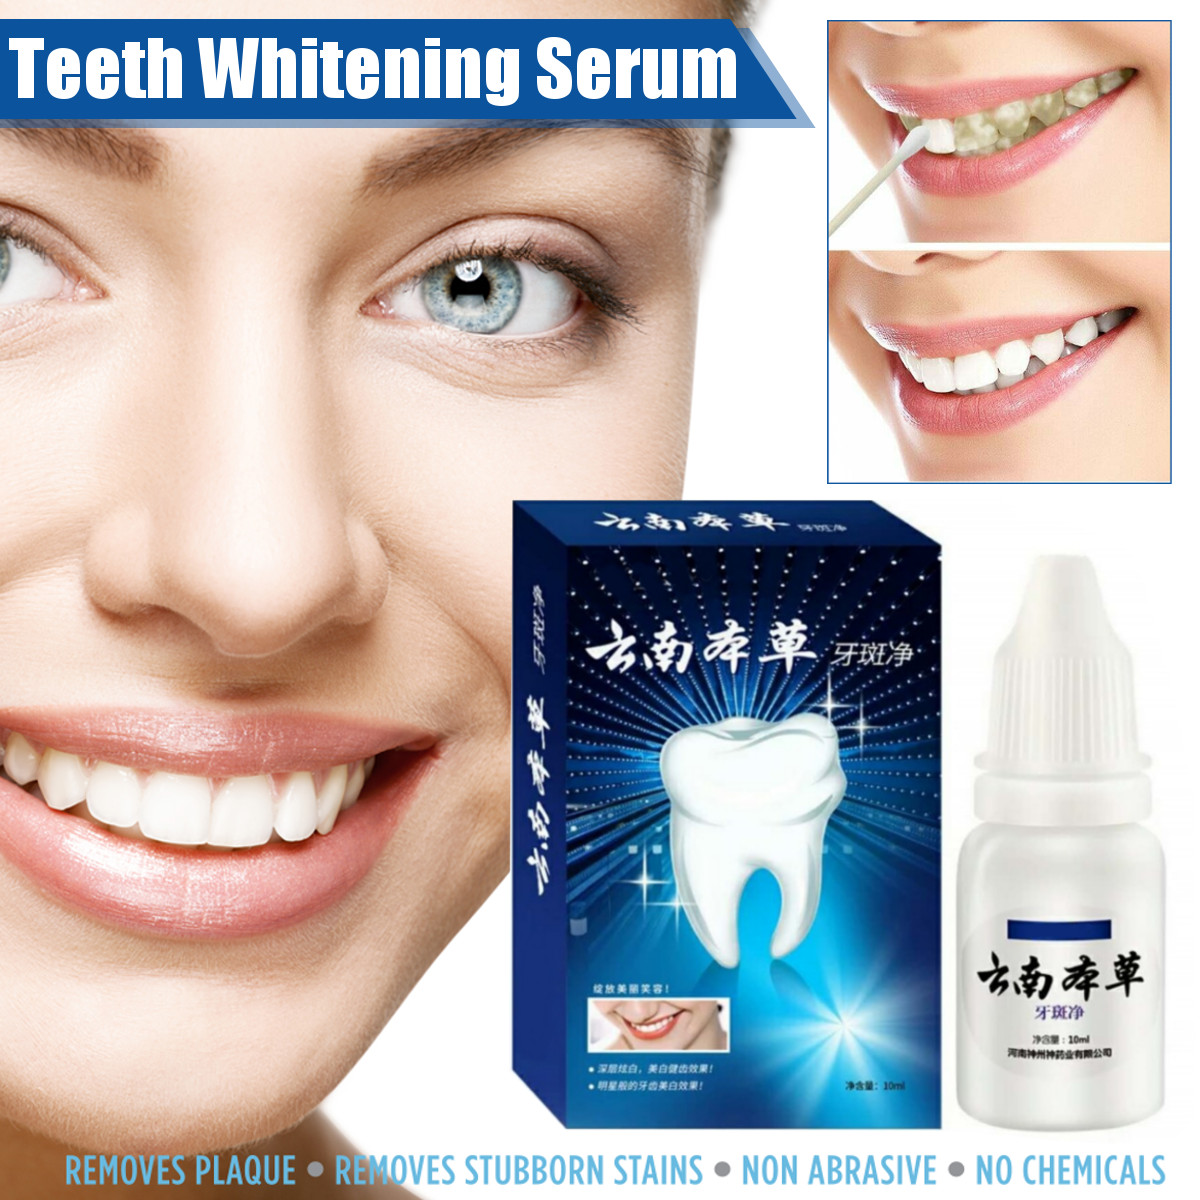 Herb-Teeth-Whitening-Cleansing-Serum-Essence-Oral-Hygiene-Effectively-Removes-Tartars-Plaque-Stains--1815887-3